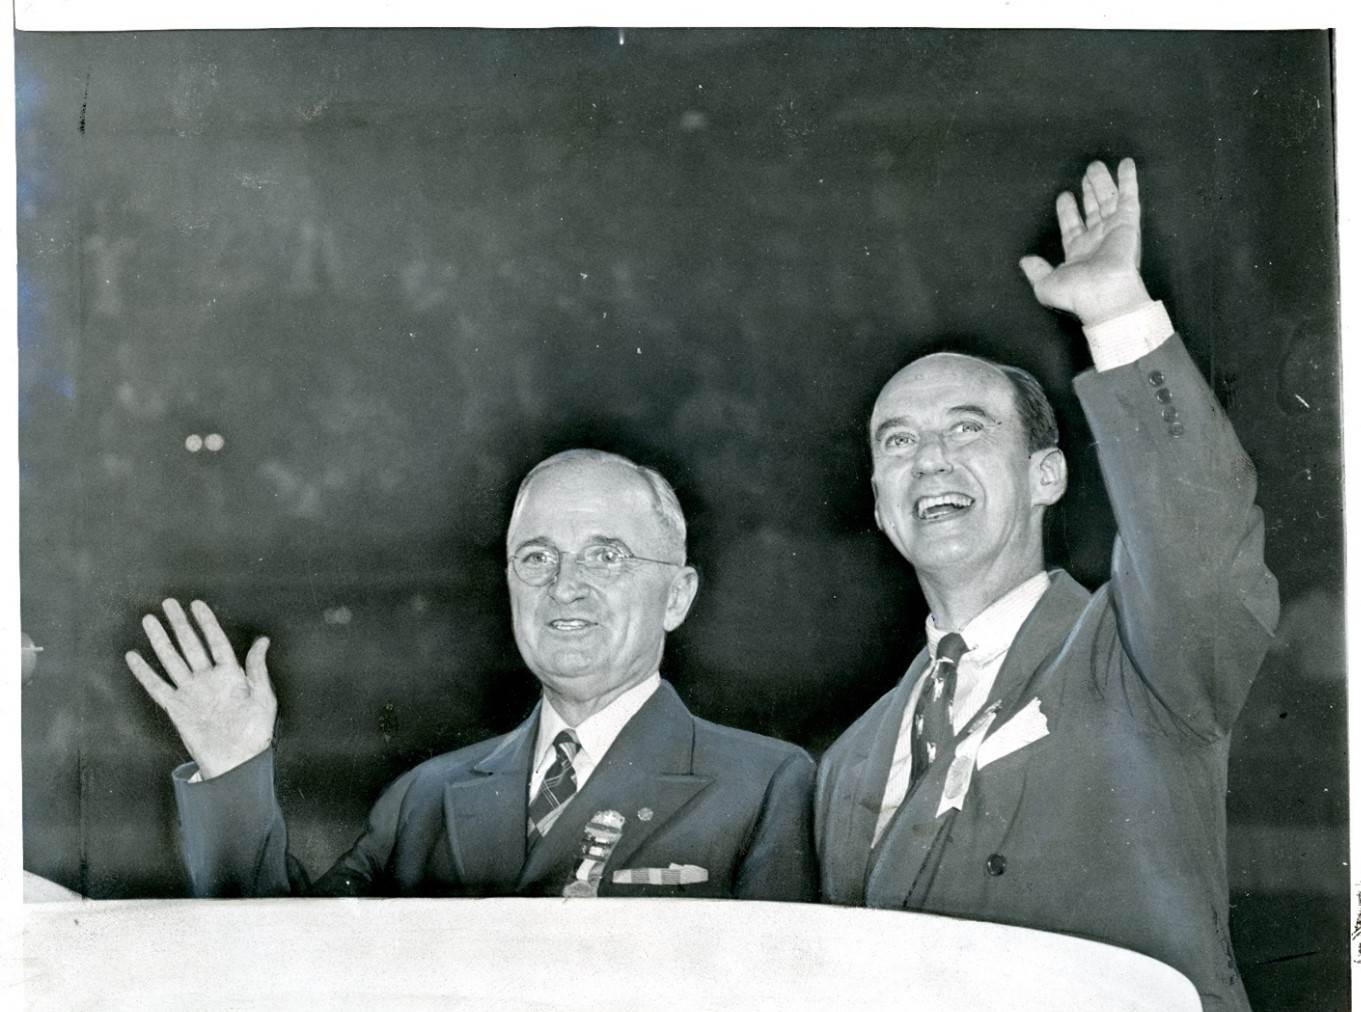 Adlai Stevenson with President Harry Truman at the 1952 Democratic National Convention